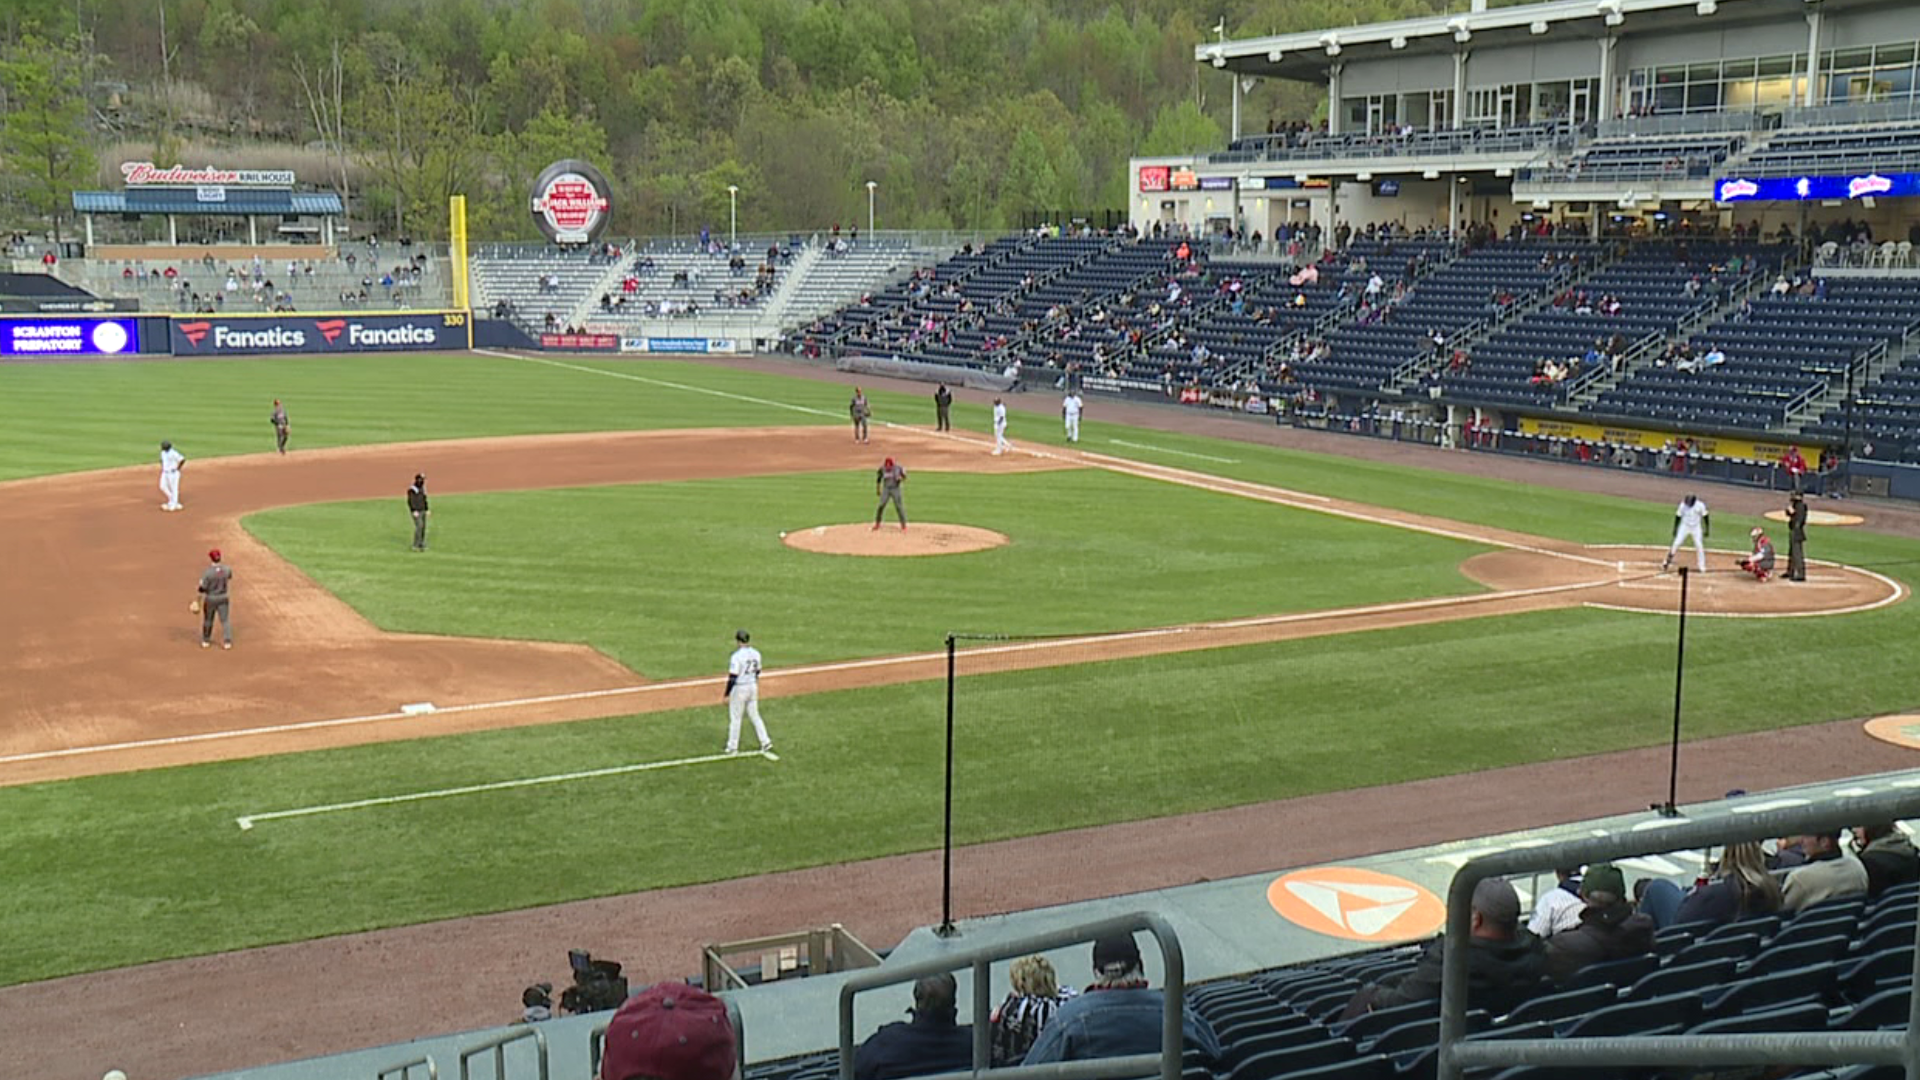 This is the first time fans have been able to watch the game in person from PNC Field in a year and a half. The 2020 season was canceled because of the pandemic.